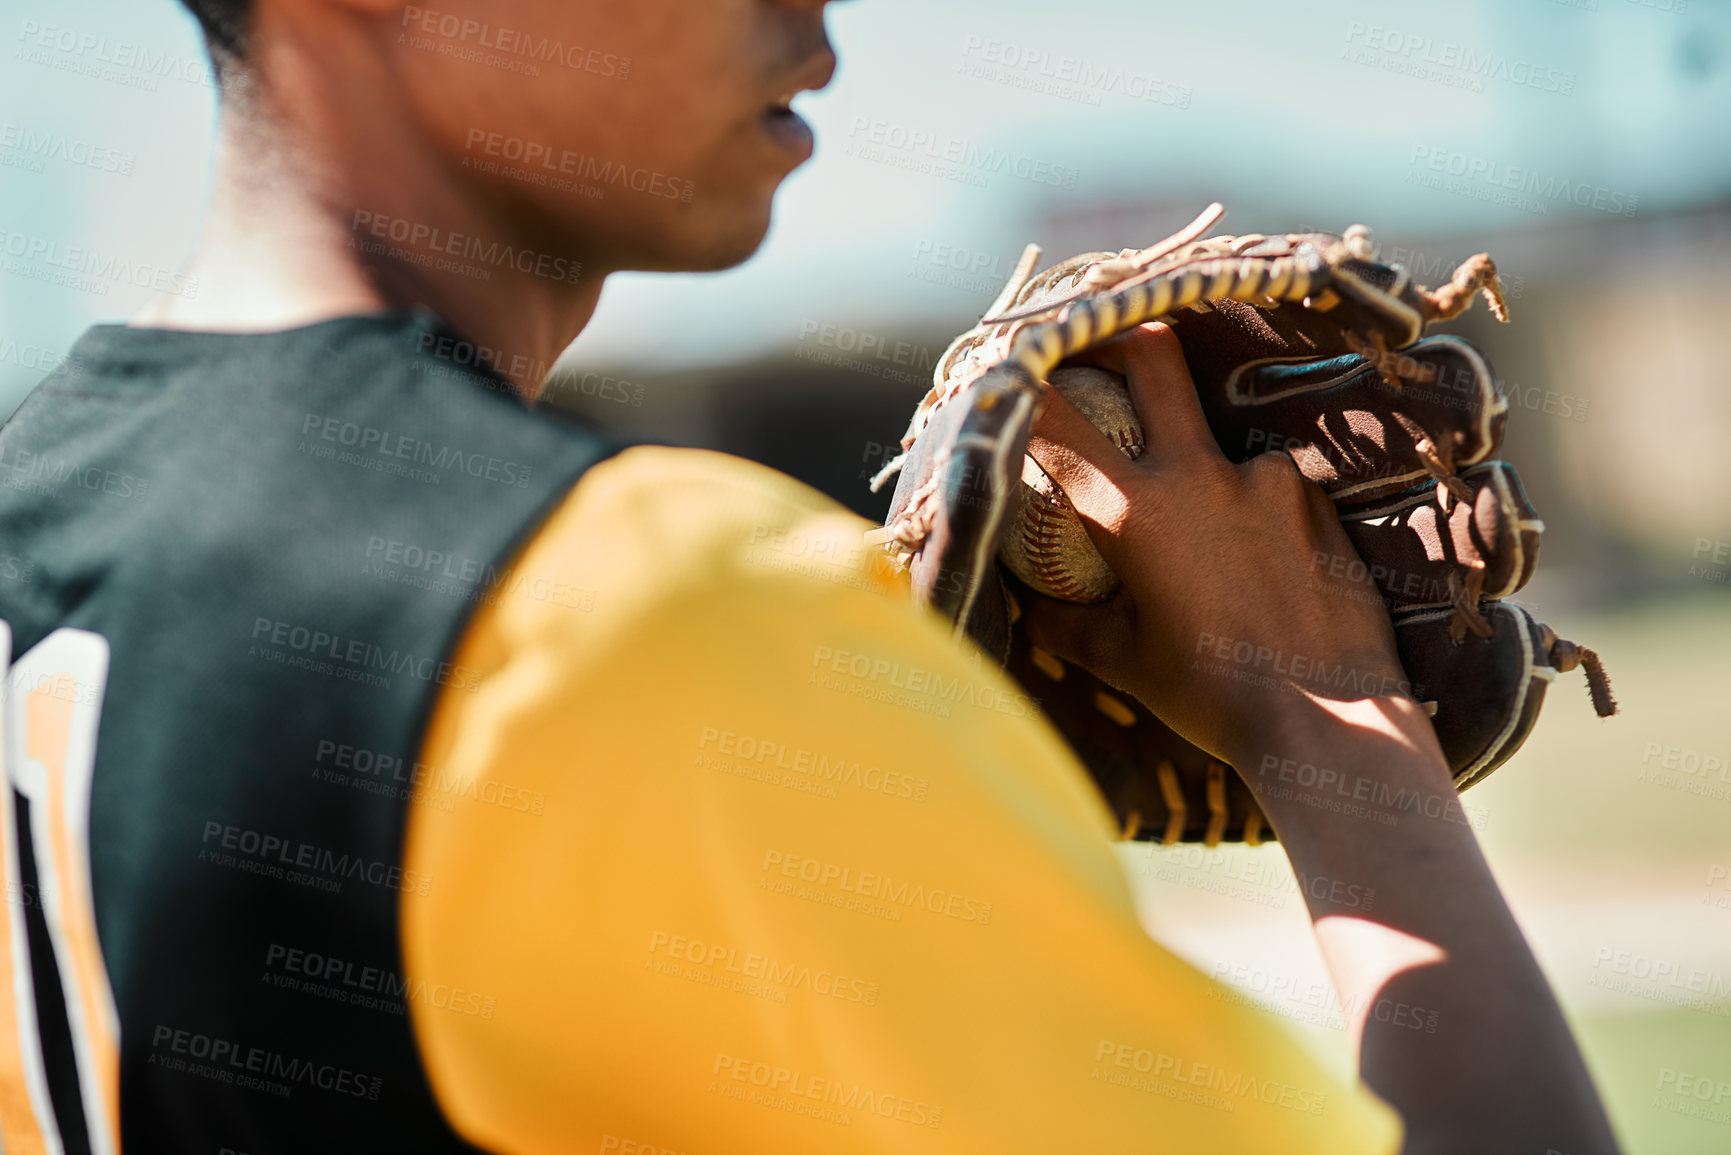 Buy stock photo Shot of a young baseball player getting ready to pitch the ball during a game outdoors